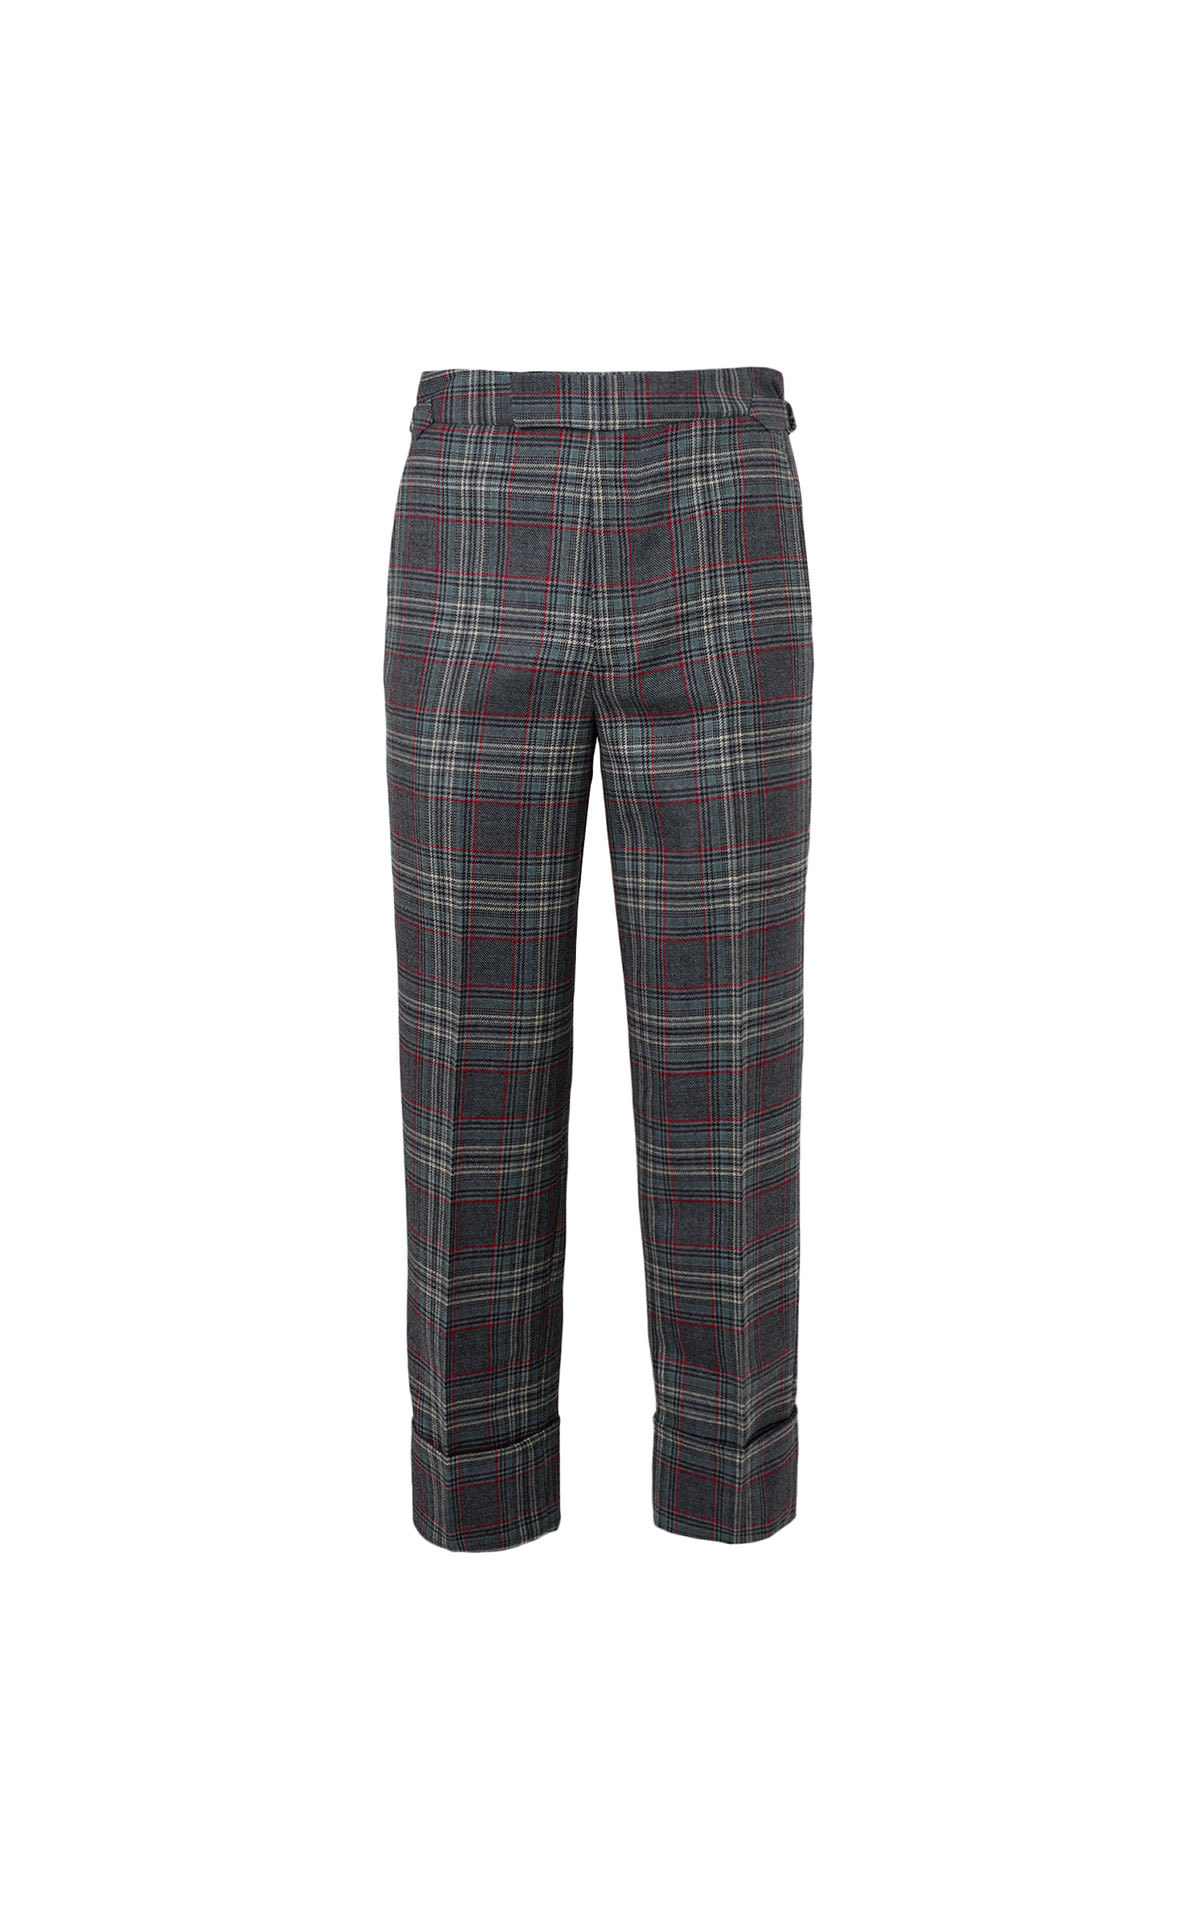 Vivienne Westwood Dave trousers from Bicester Village